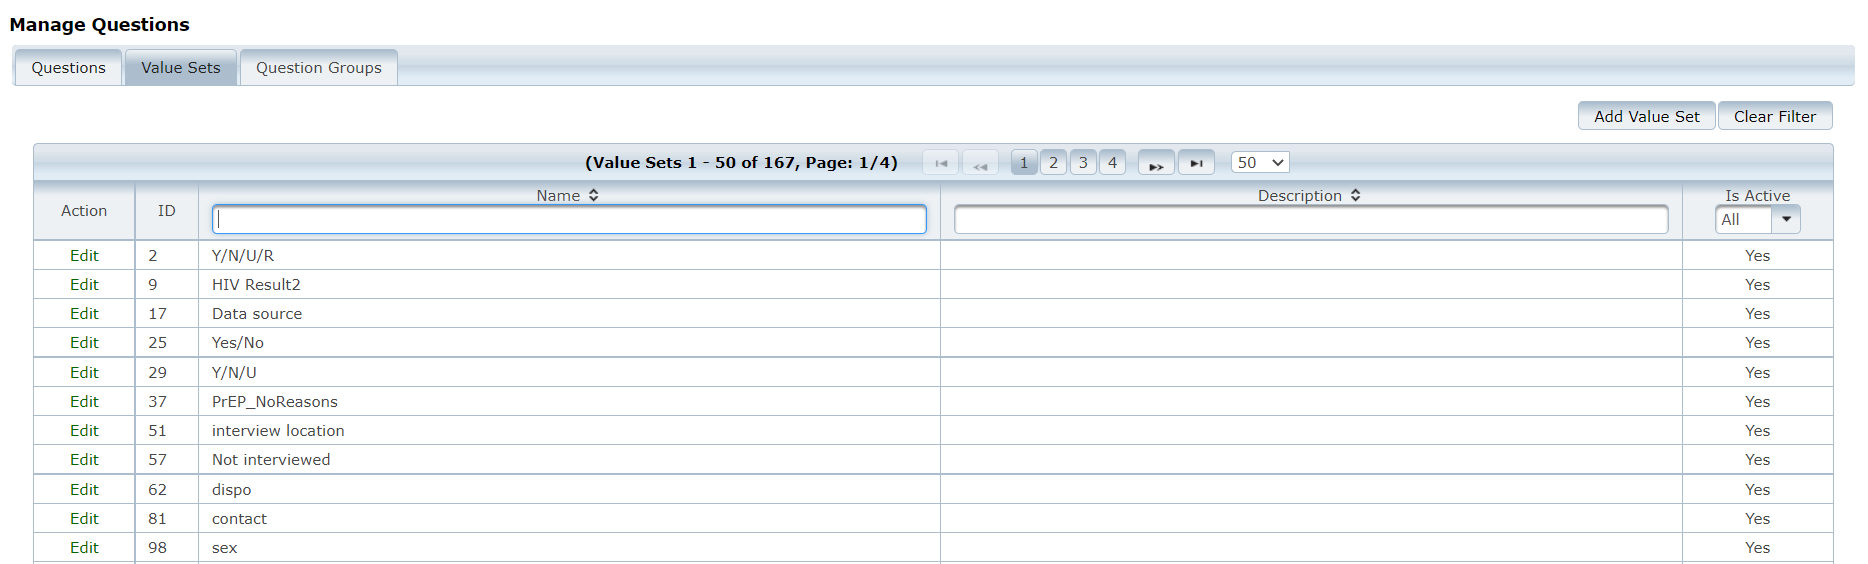 Screenshot of Manage Questions page showing value sets tab and list of values that can be used in form responses